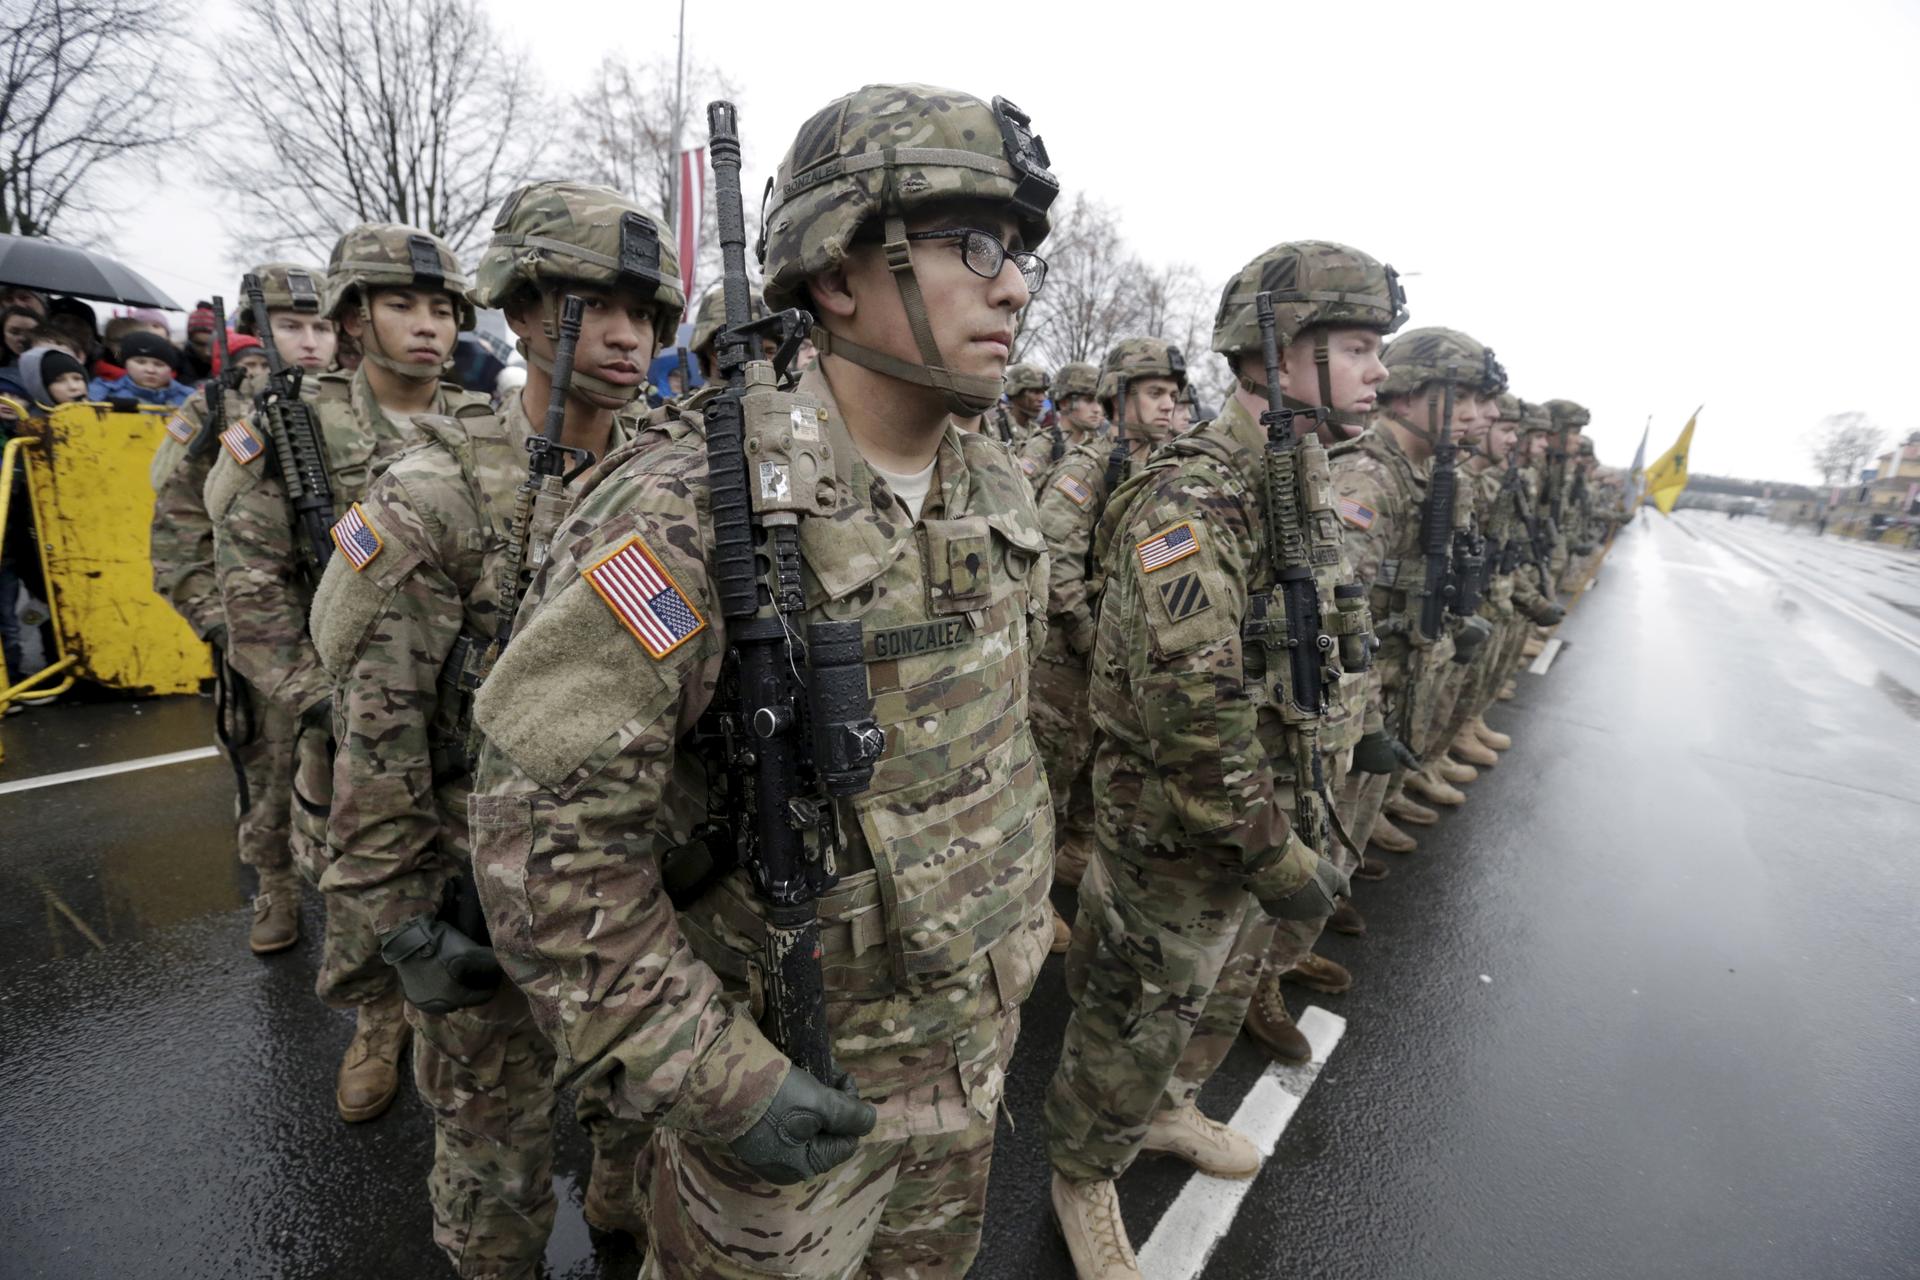 U.S. troops participate in Latvia's Independence Day military parade in Riga, Latvia, November 18, 2015.